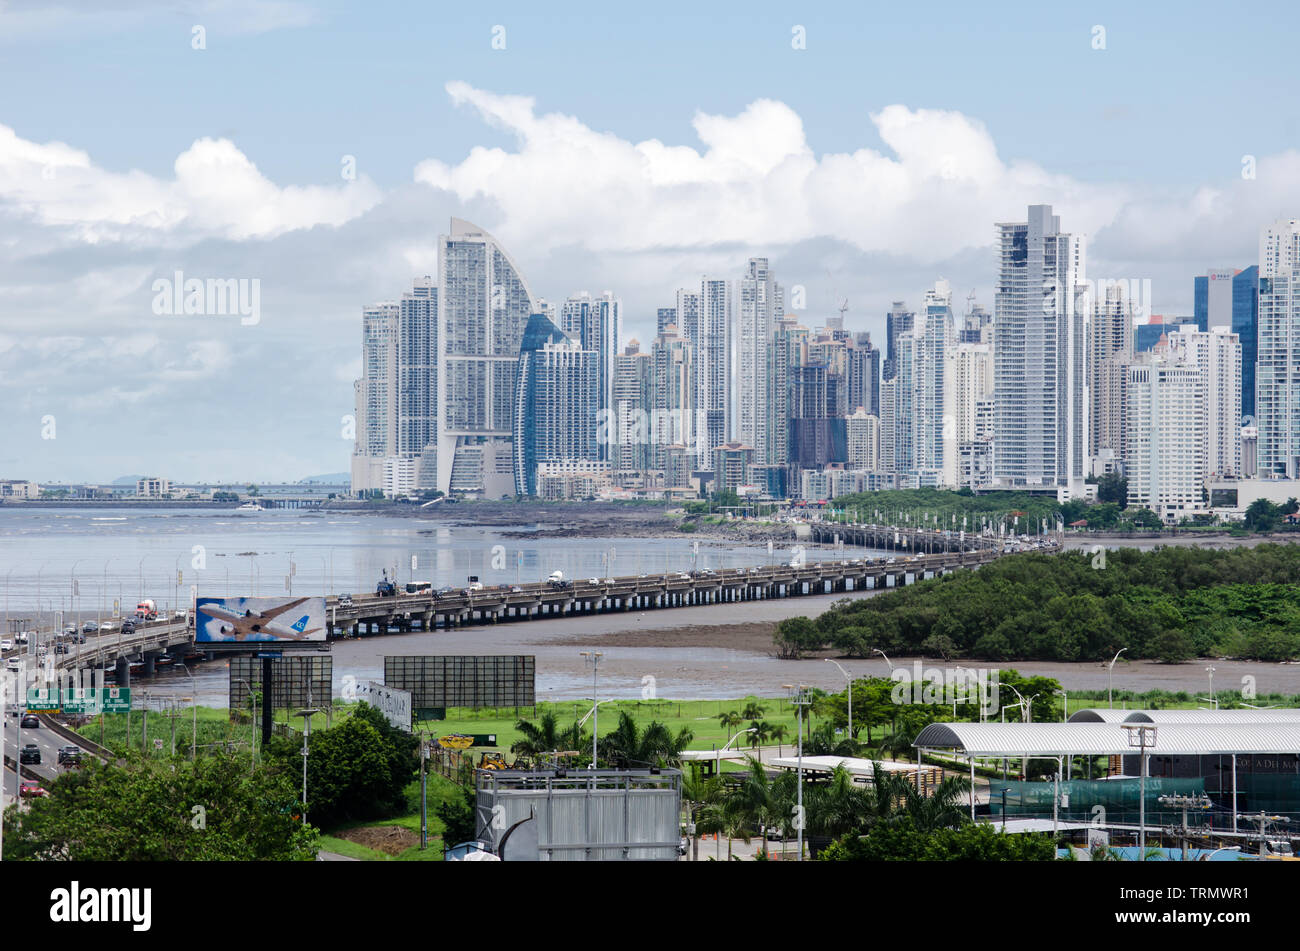 Panama City skyline as seen from Costa del Este neighborhood. The South Corridor that connects the city centre with tocumen airport is also seen. Stock Photo